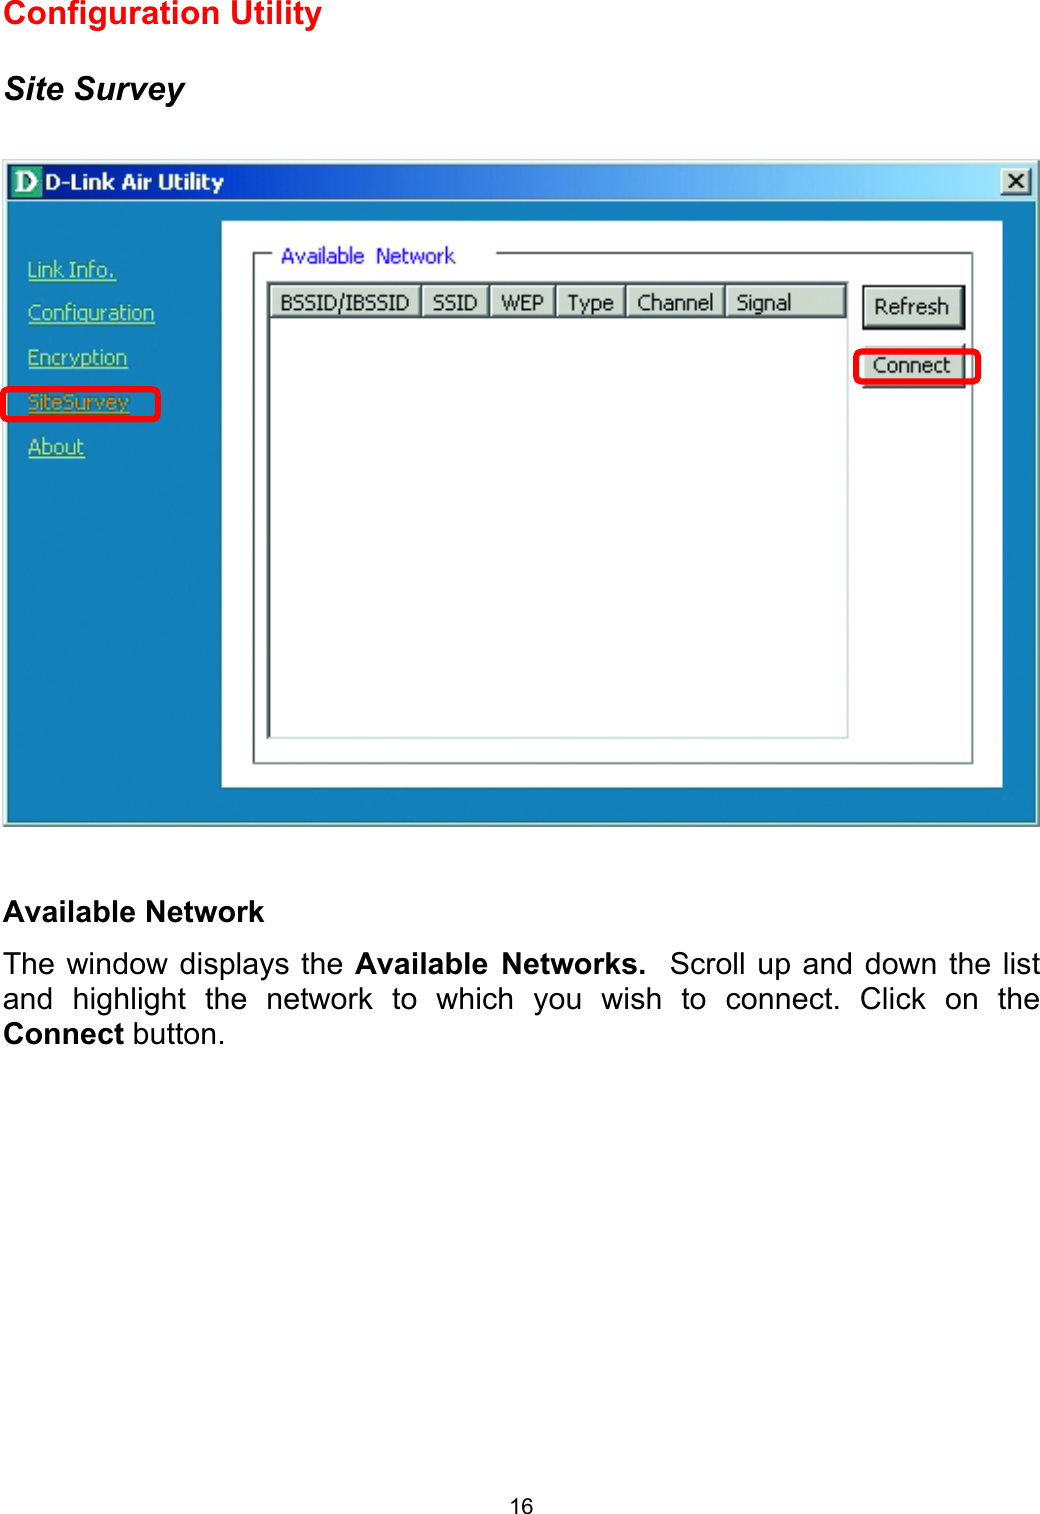  16Configuration Utility  Site Survey    Available Network The window displays the Available Networks.  Scroll up and down the list and highlight the network to which you wish to connect. Click on the Connect button.         